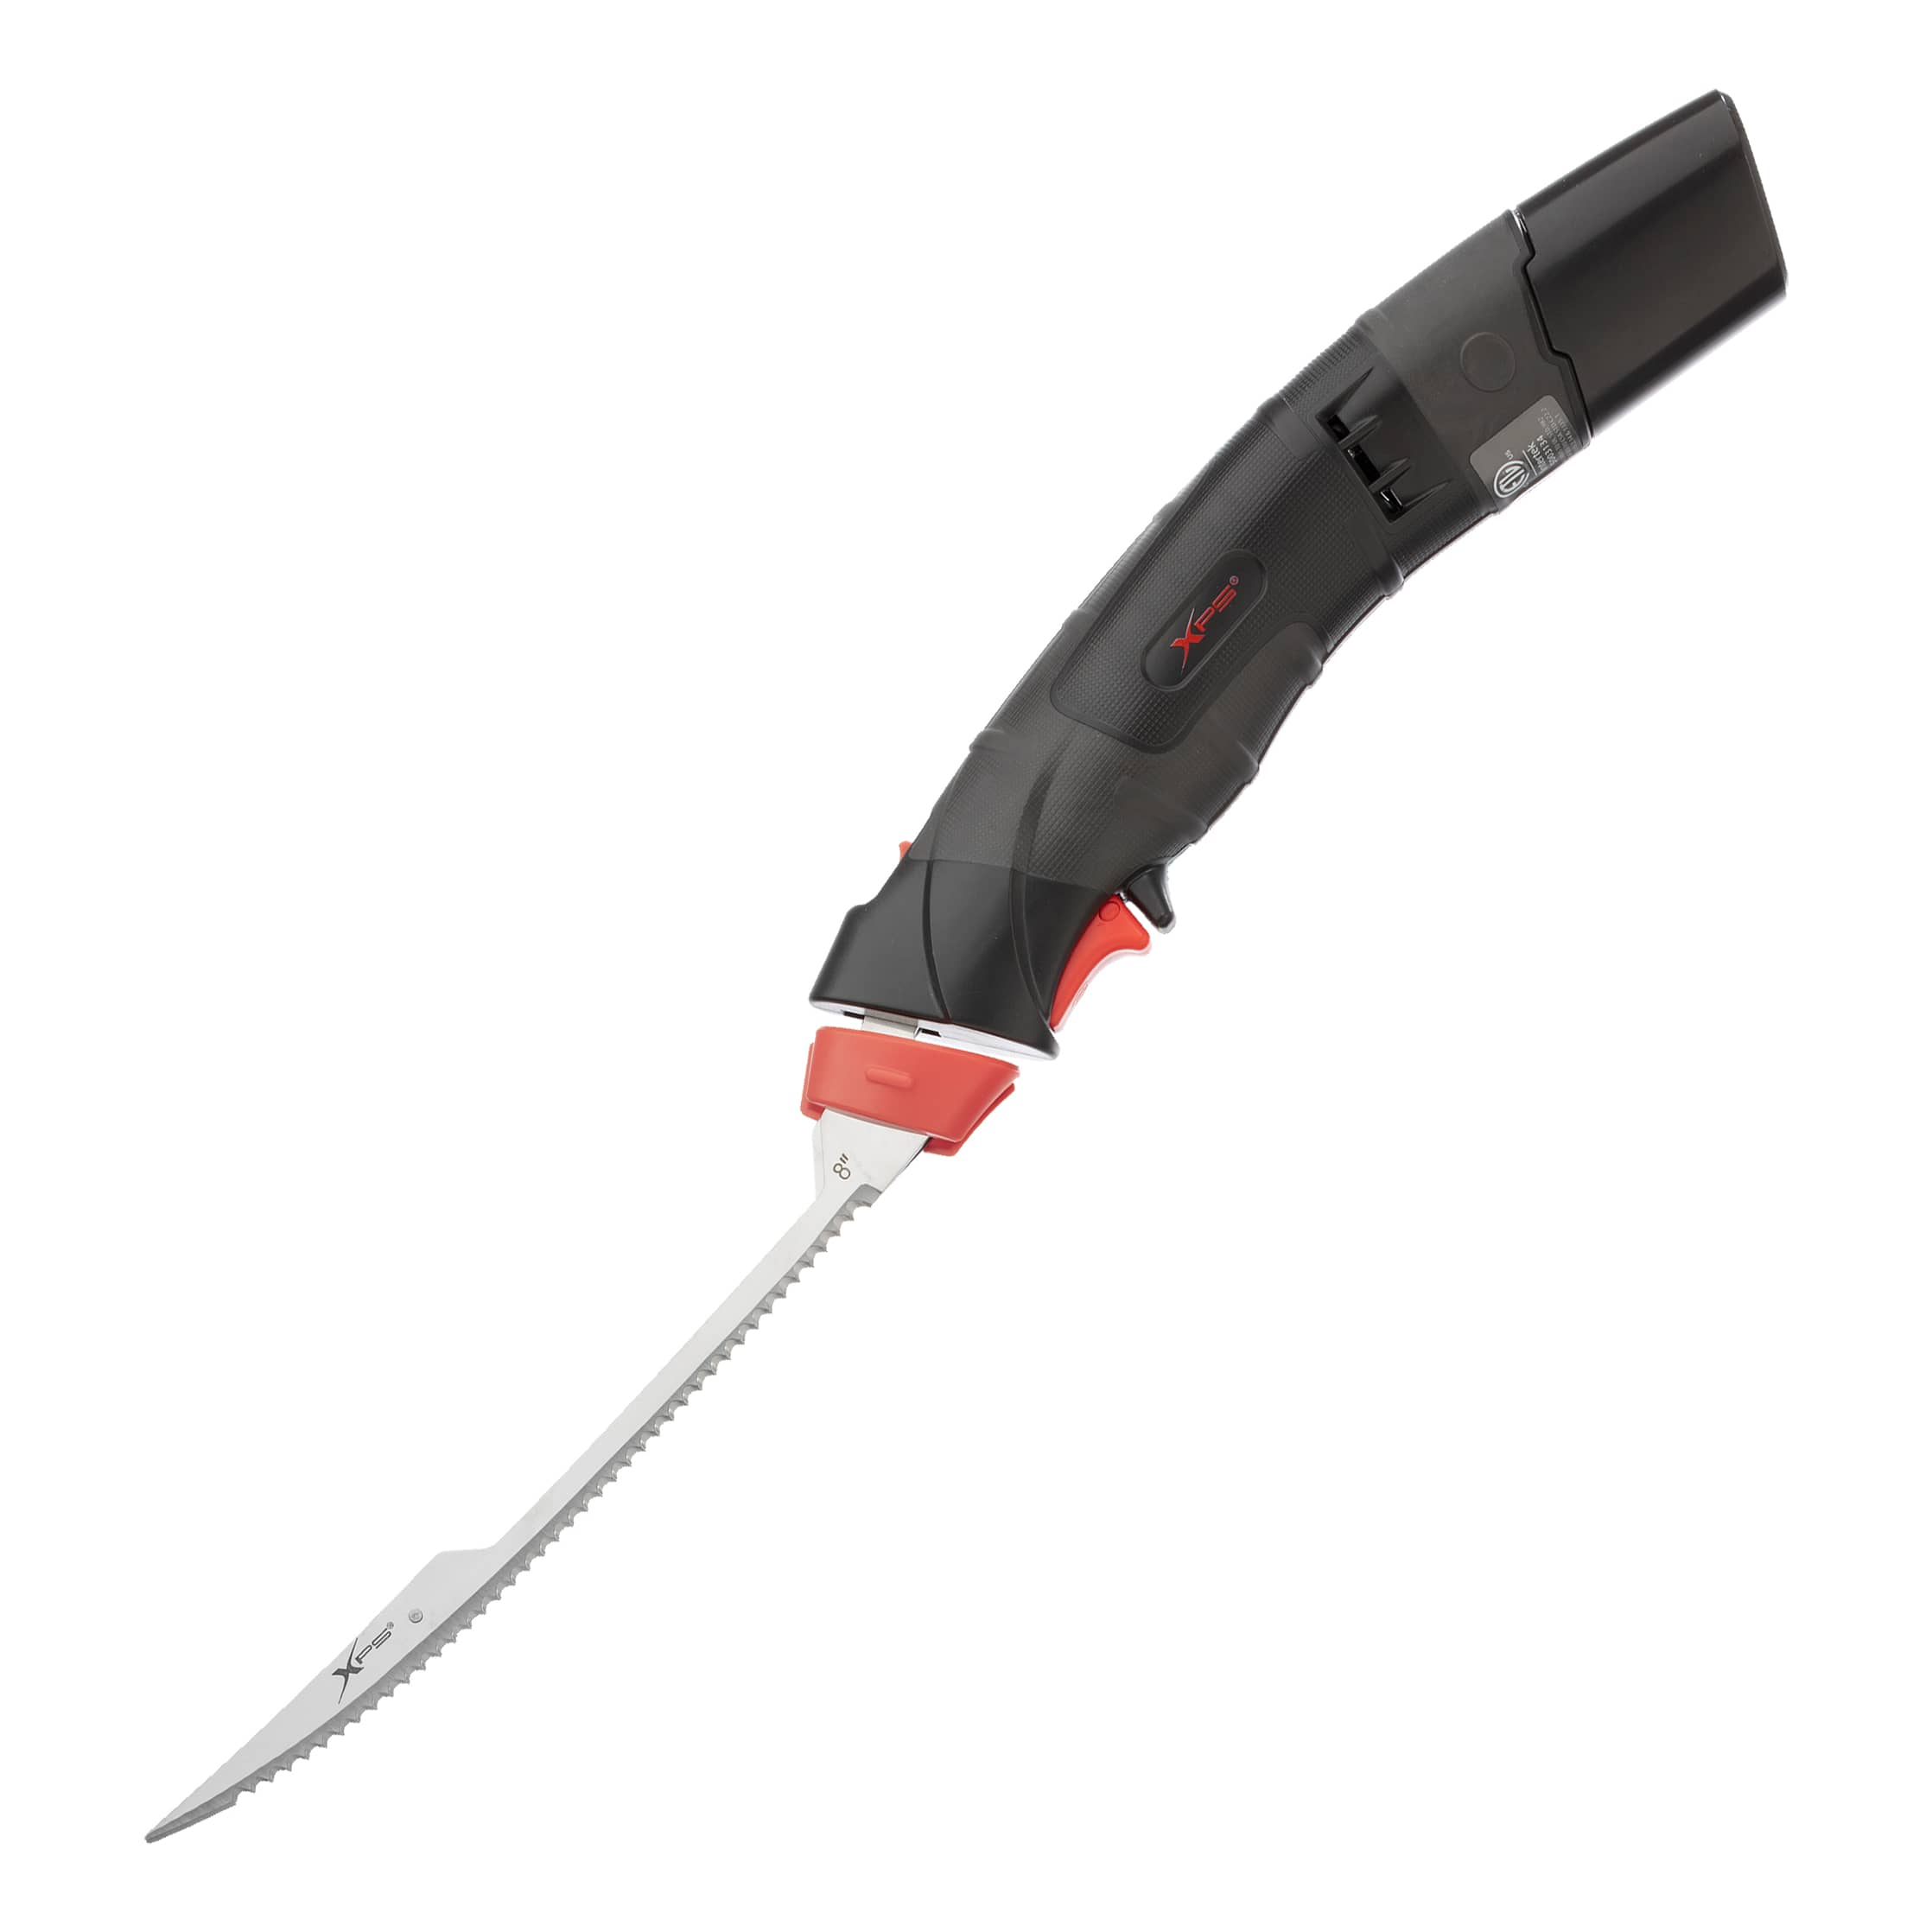 Bass Pro Shops XPS Lithium-Ion Battery-Powered Fillet Knife - Knife View